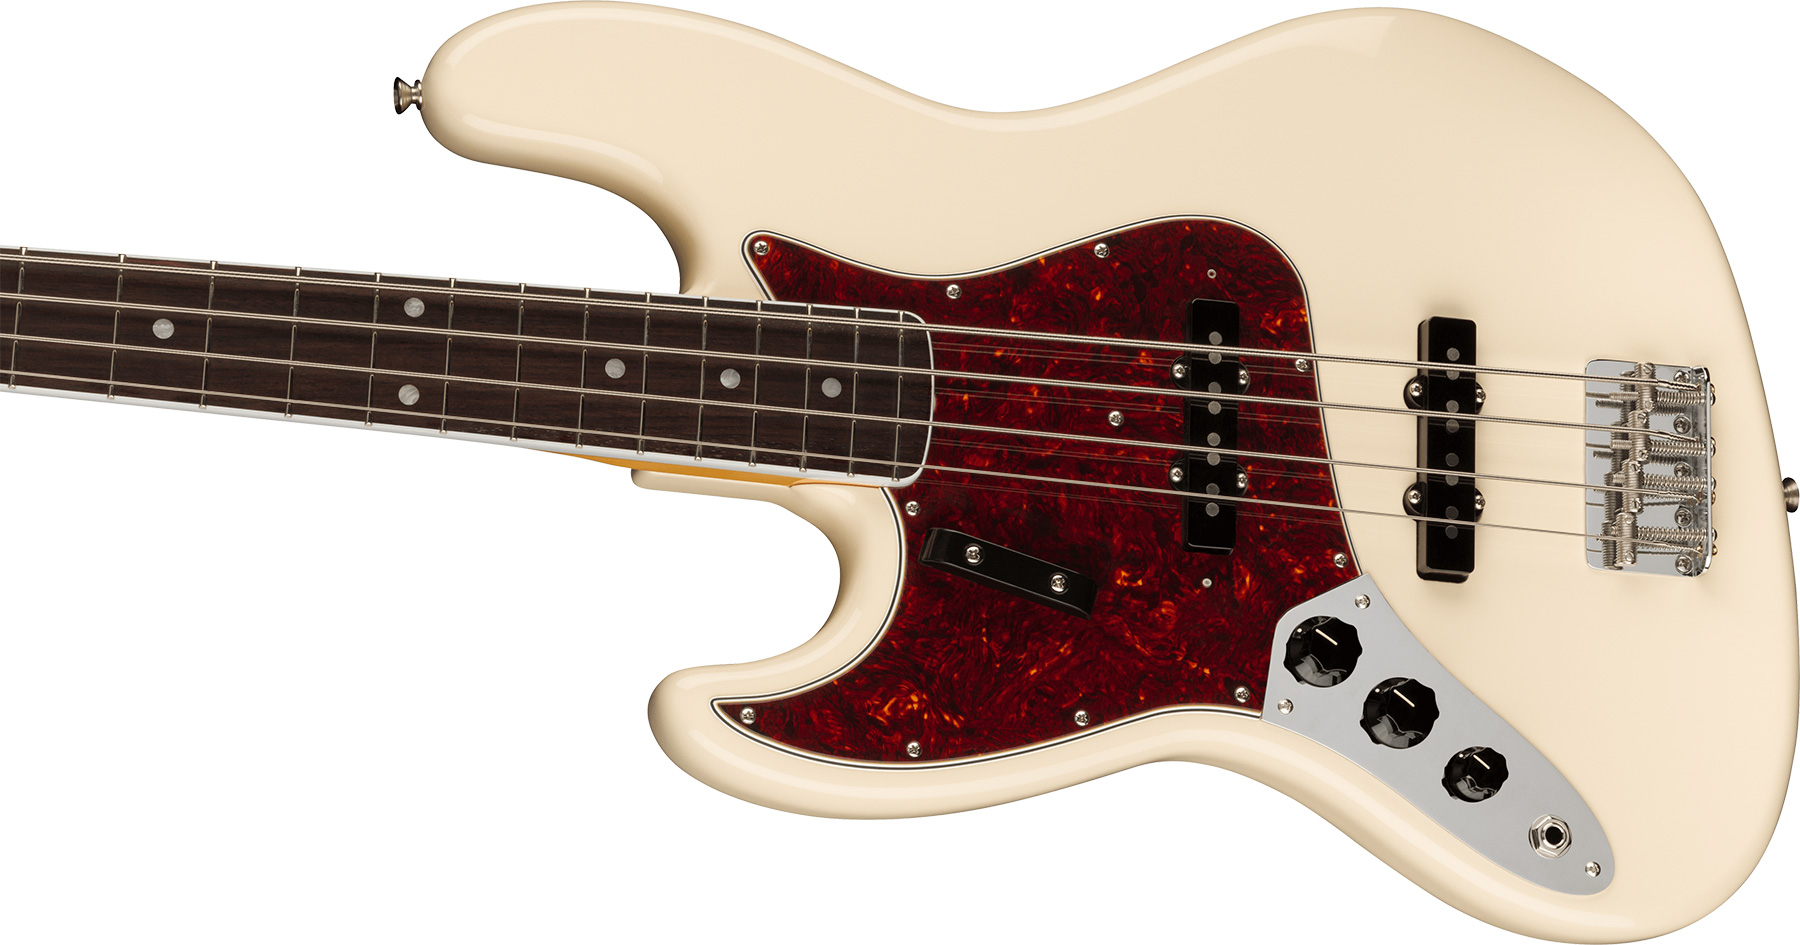 Fender Jazz Bass 1966 American Vintage Ii Lh Gaucher Usa Rw - Olympic White - Basse Électrique Solid Body - Variation 2